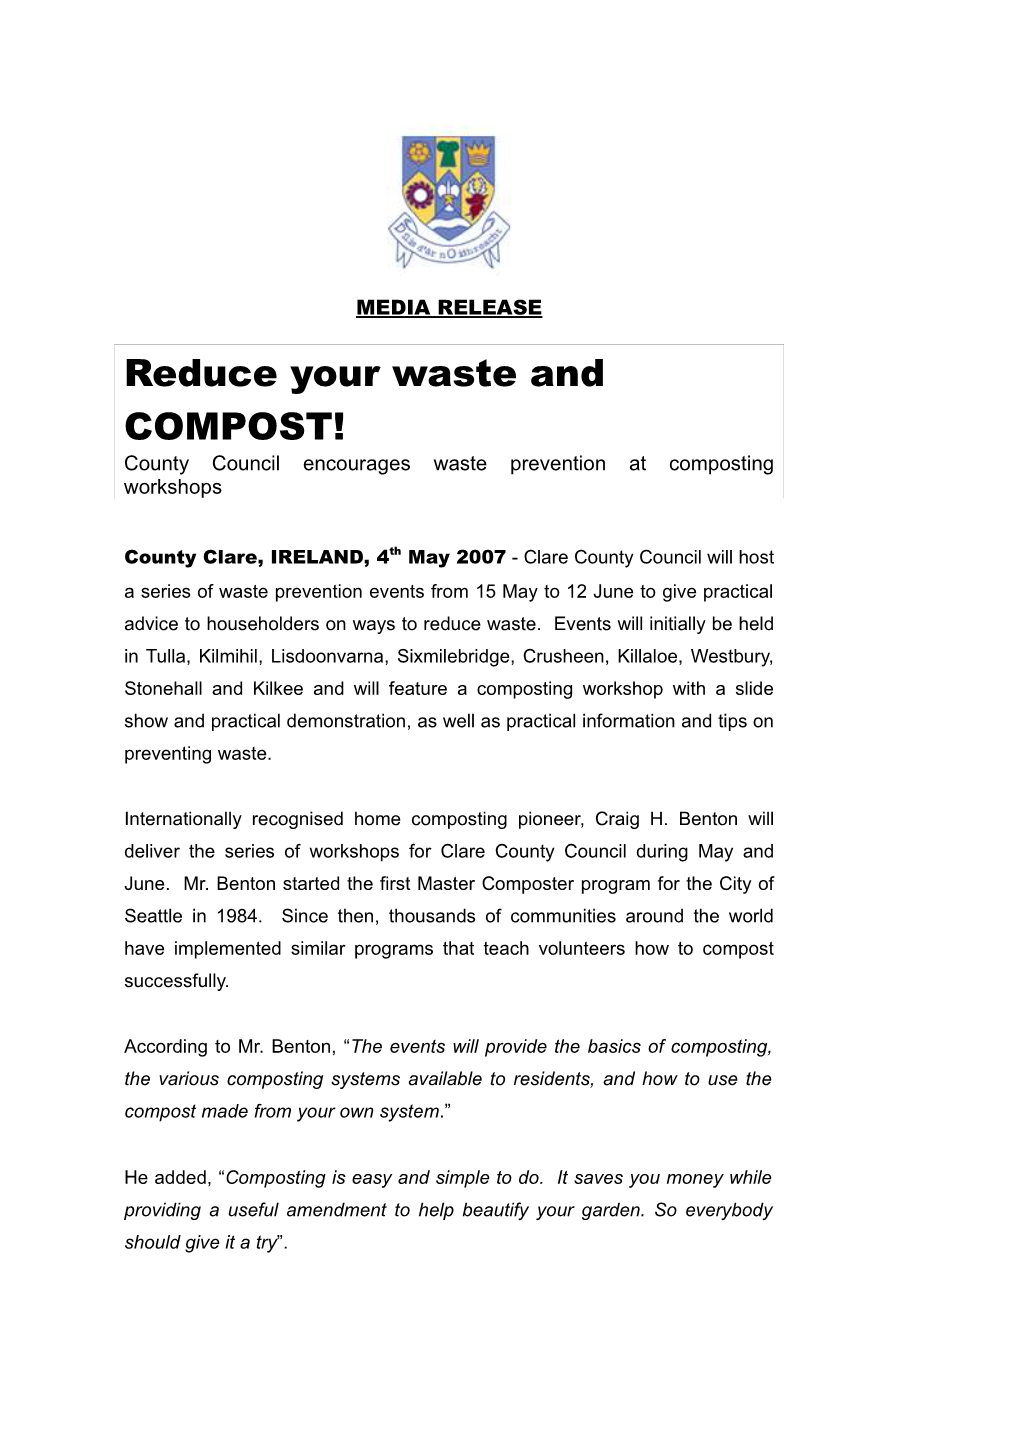 Reduce Your Waste and COMPOST! County Council Encourages Waste Prevention at Composting Workshops